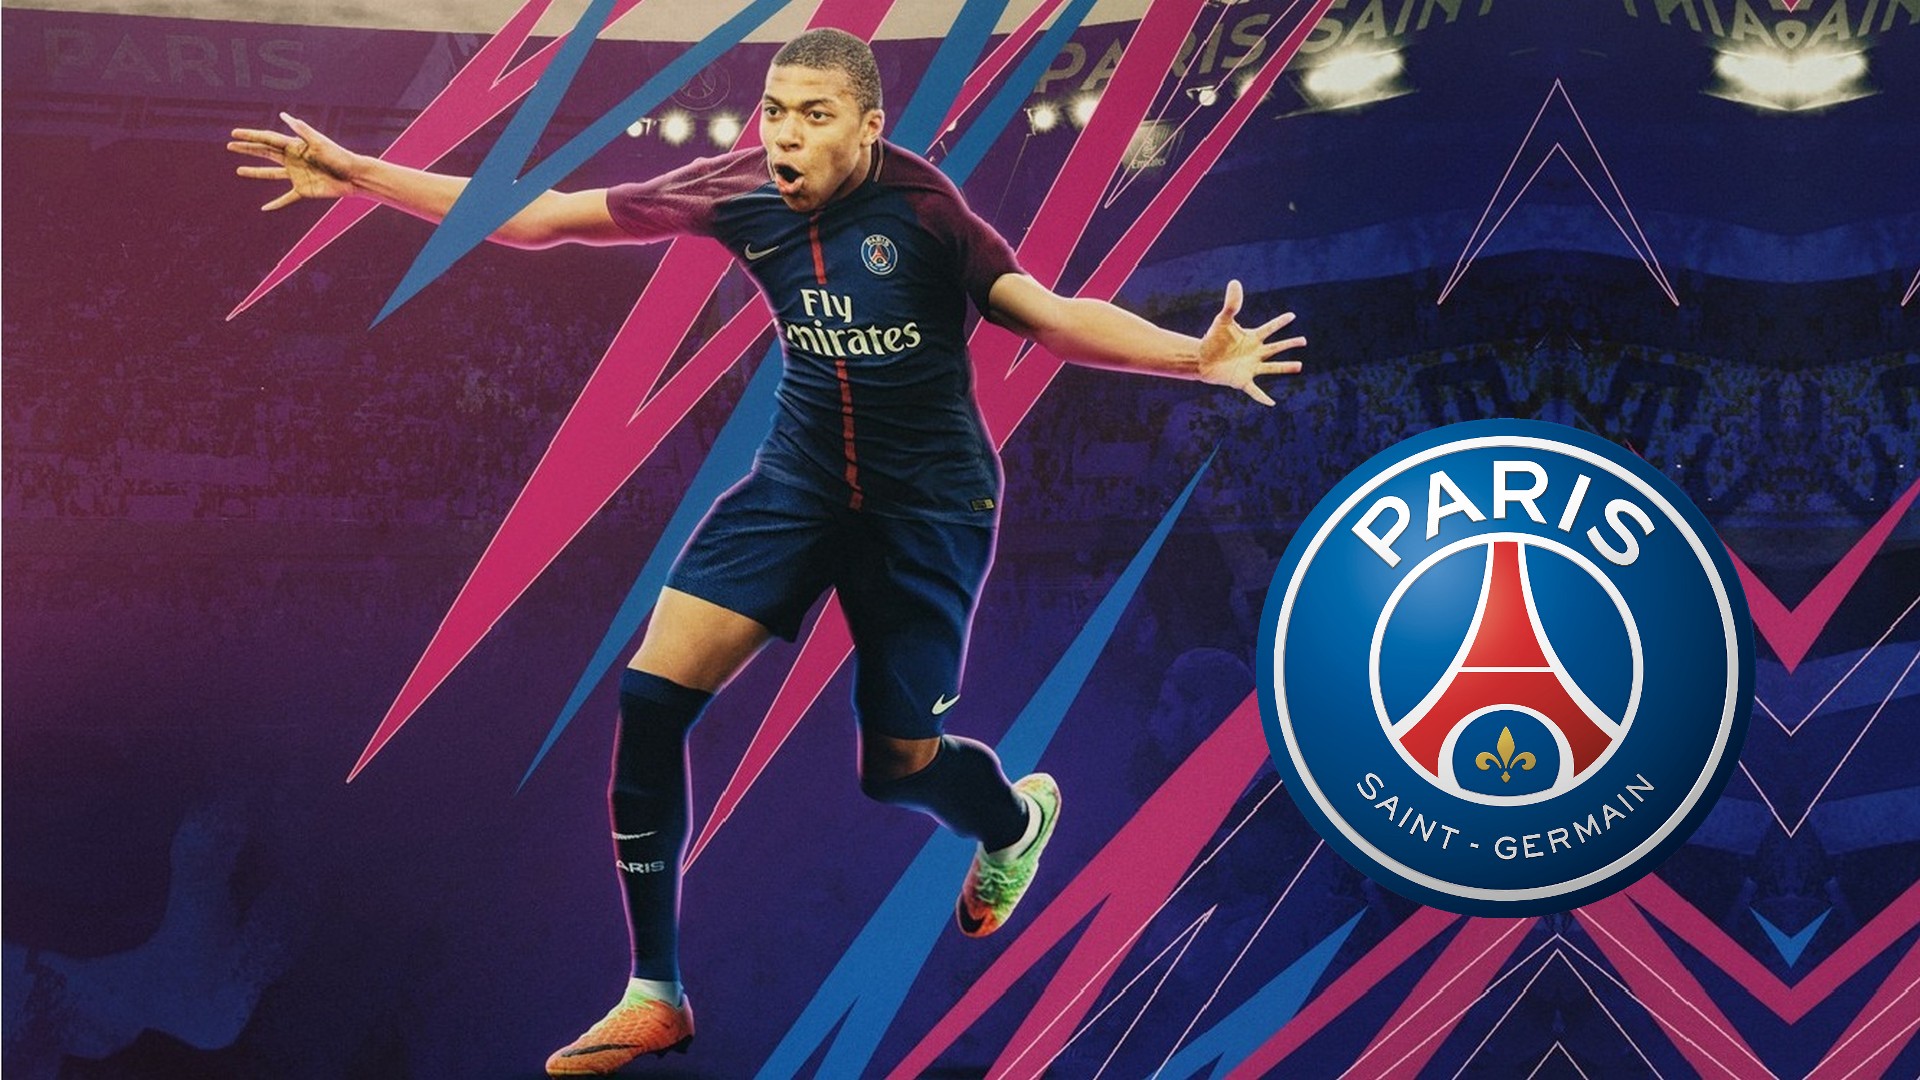 Wallpaper Desktop PSG Kylian Mbappe HD with resolution 1920x1080 pixel. You can make this wallpaper for your Mac or Windows Desktop Background, iPhone, Android or Tablet and another Smartphone device